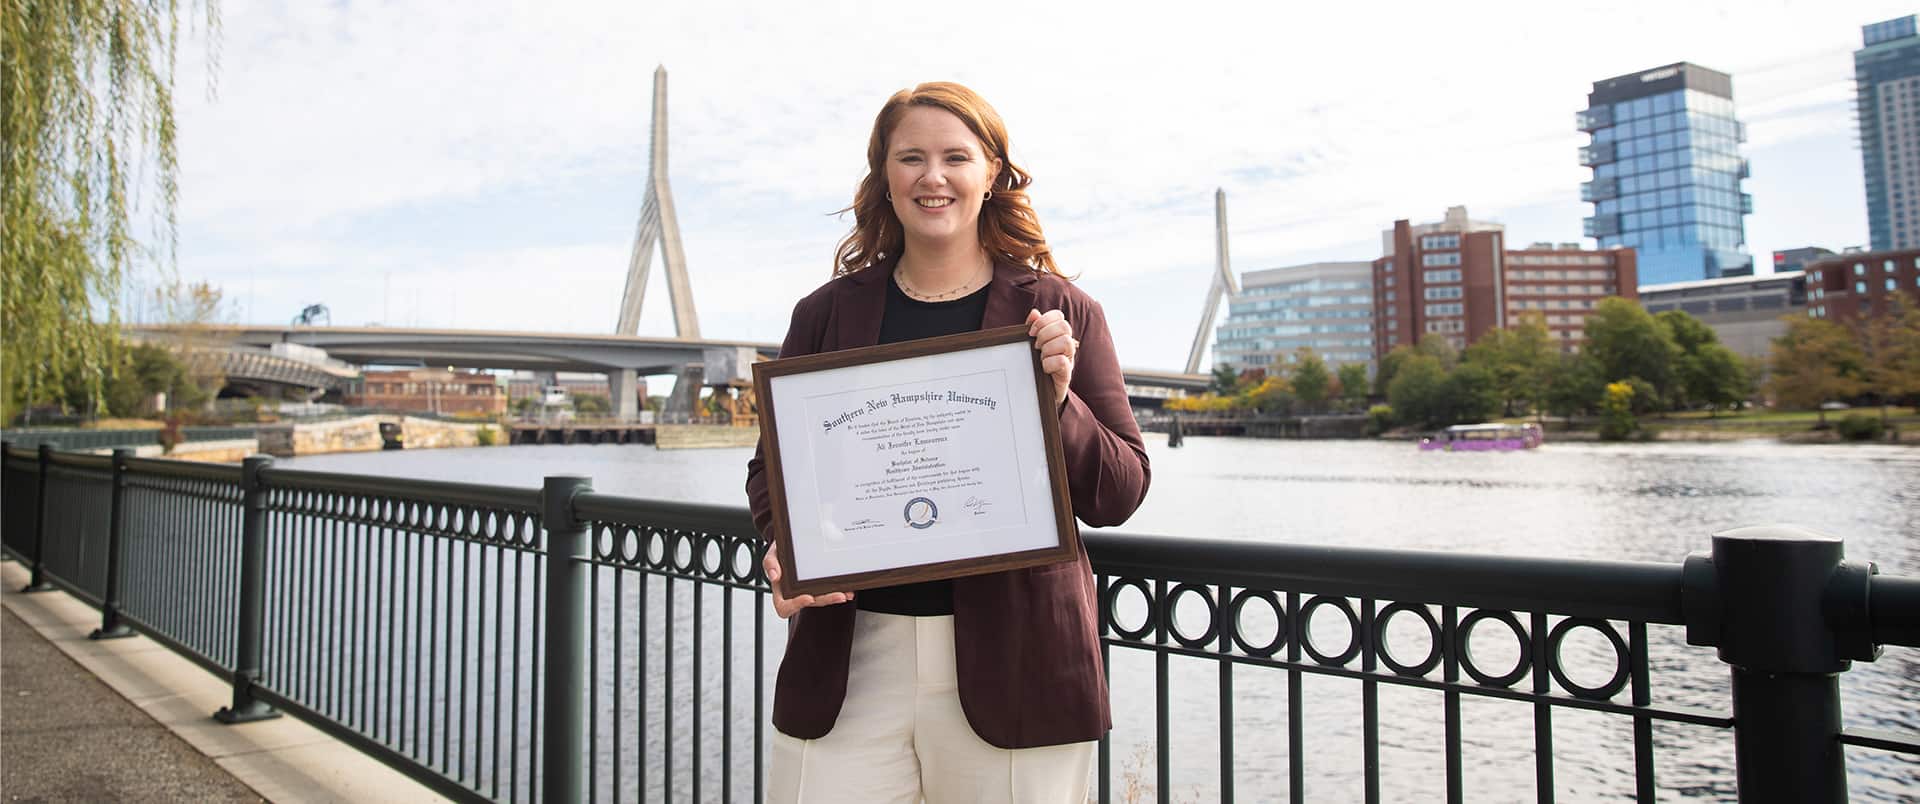 Ali Lamoreux, who earned her degree in 2022, holding her framed SNHU degree in front of a river with a tall bridge in the background.